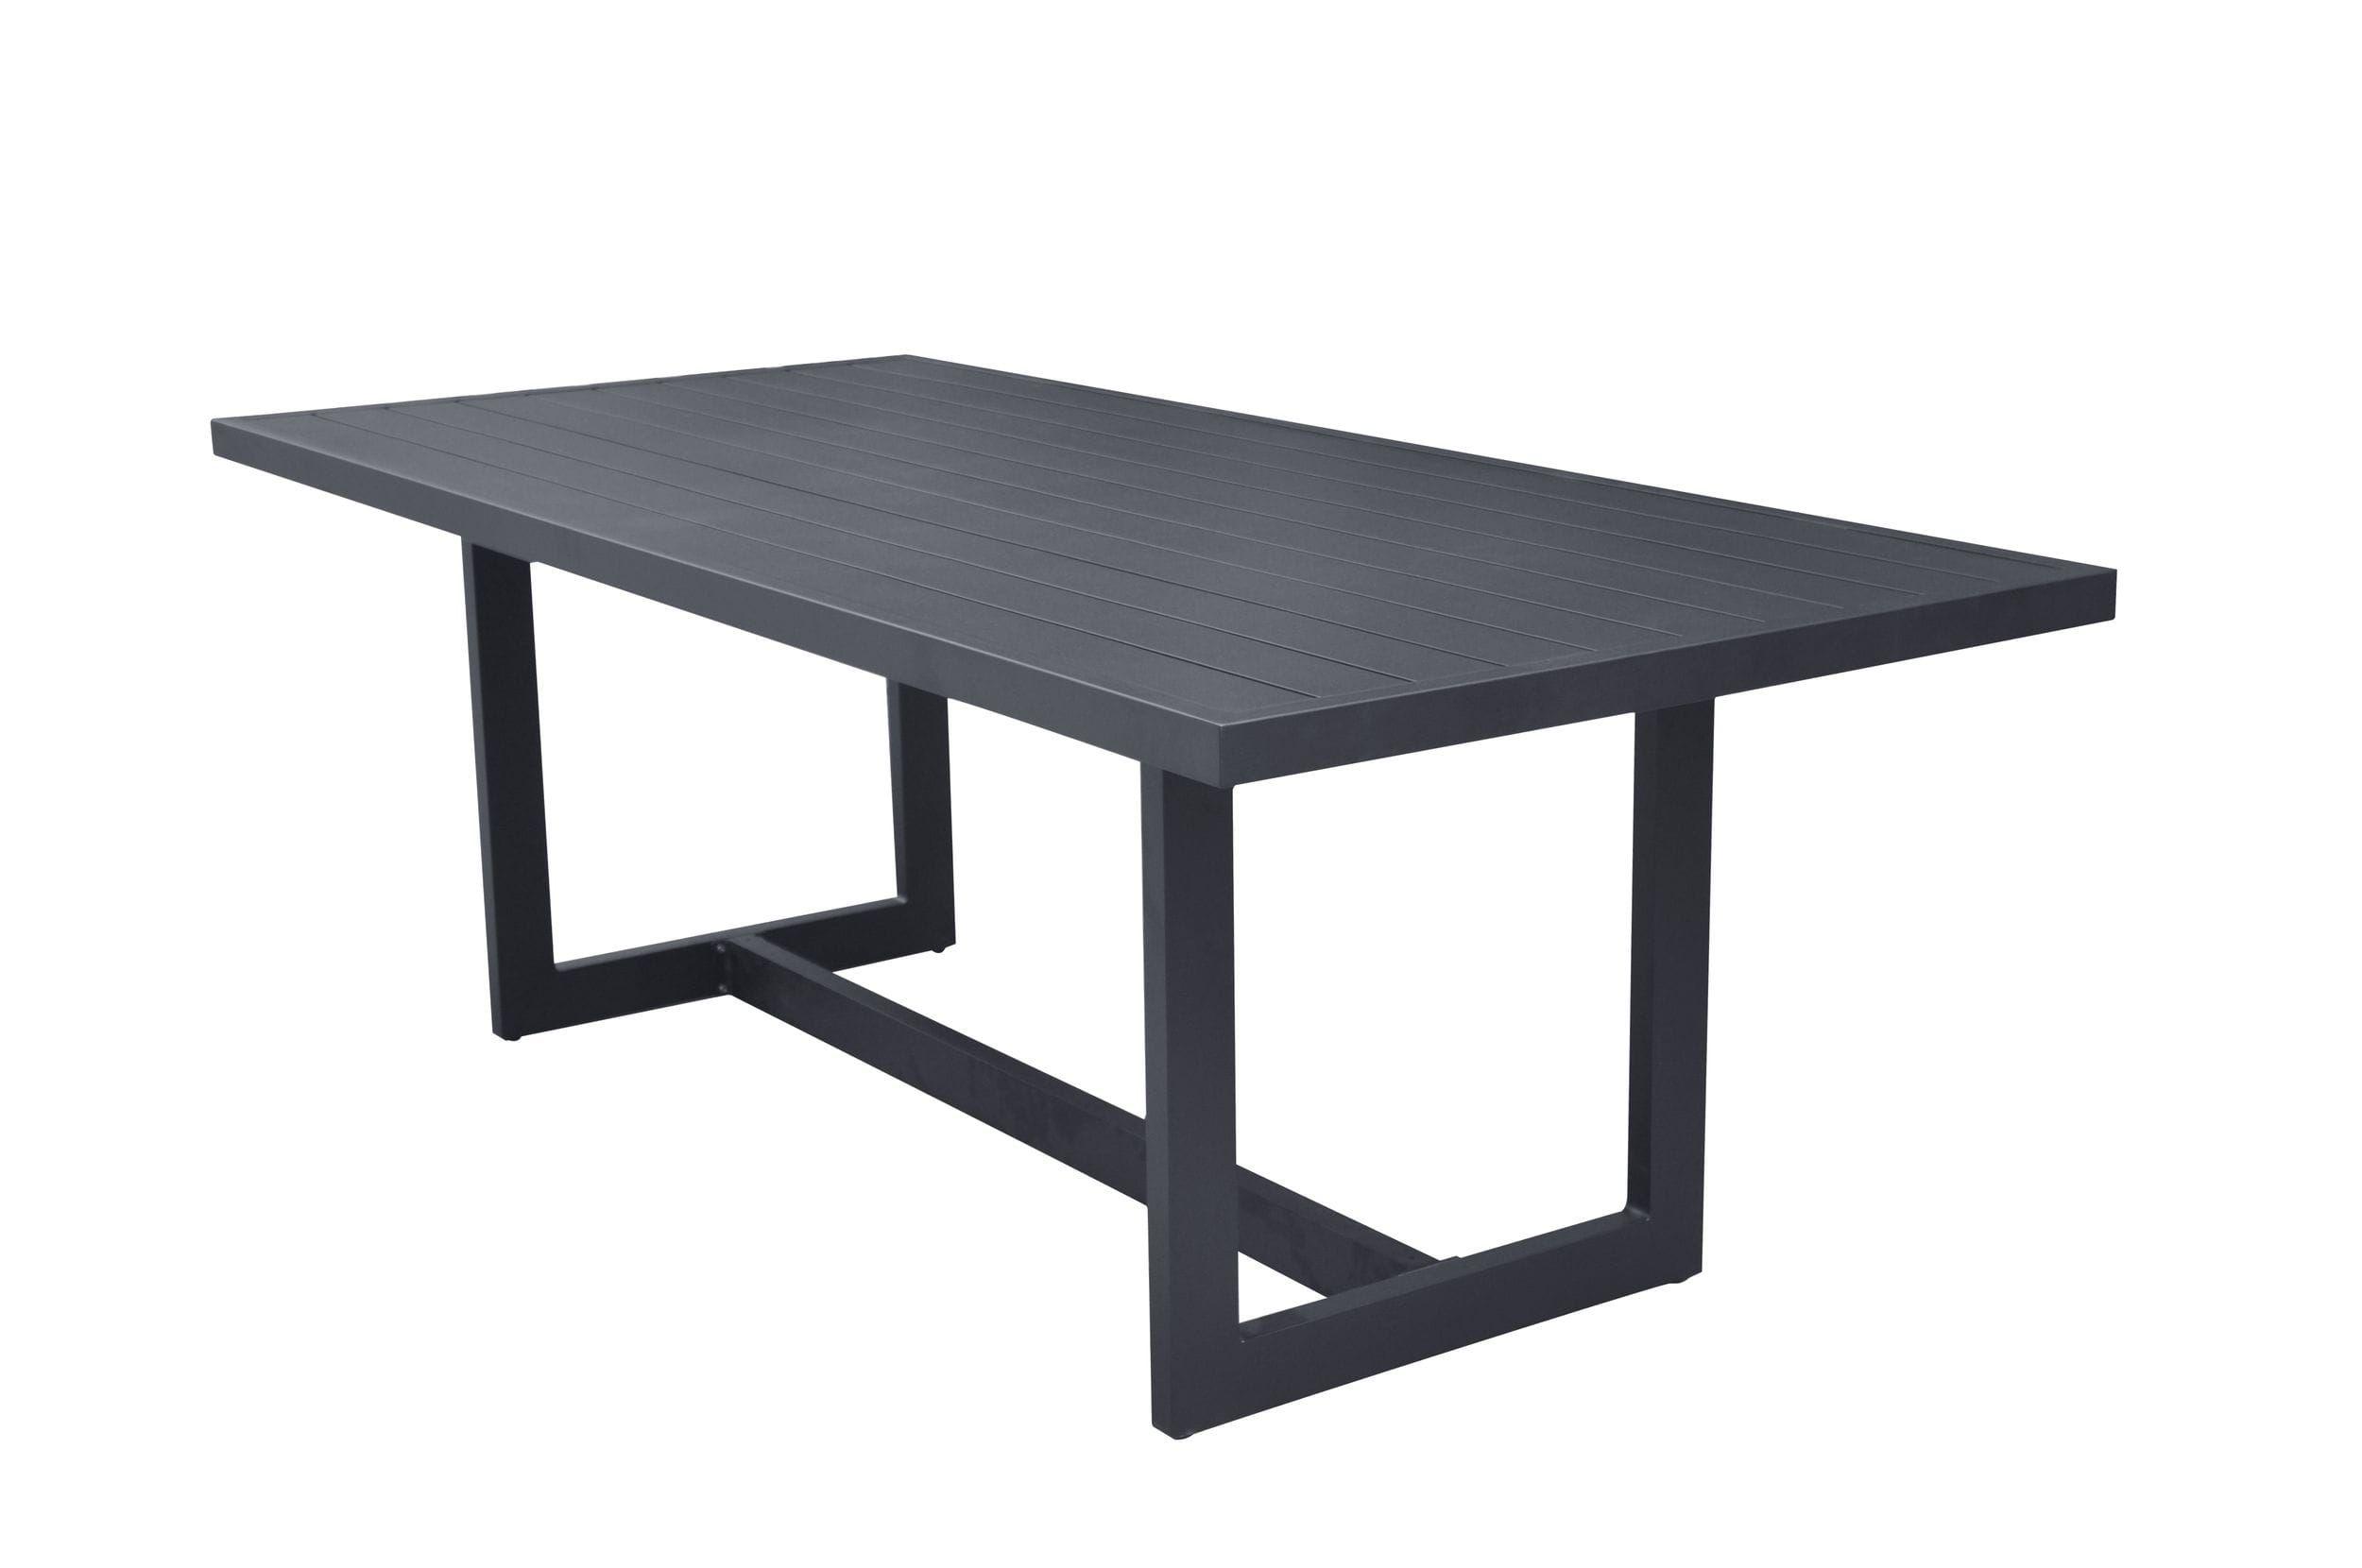 Modern Outdoor Dining Table Renava Wake Outdoor Dining Table VGGEMONTALK-CH-GRY-2 VGGEMONTALK-CH-GRY-2 in Charcoal 